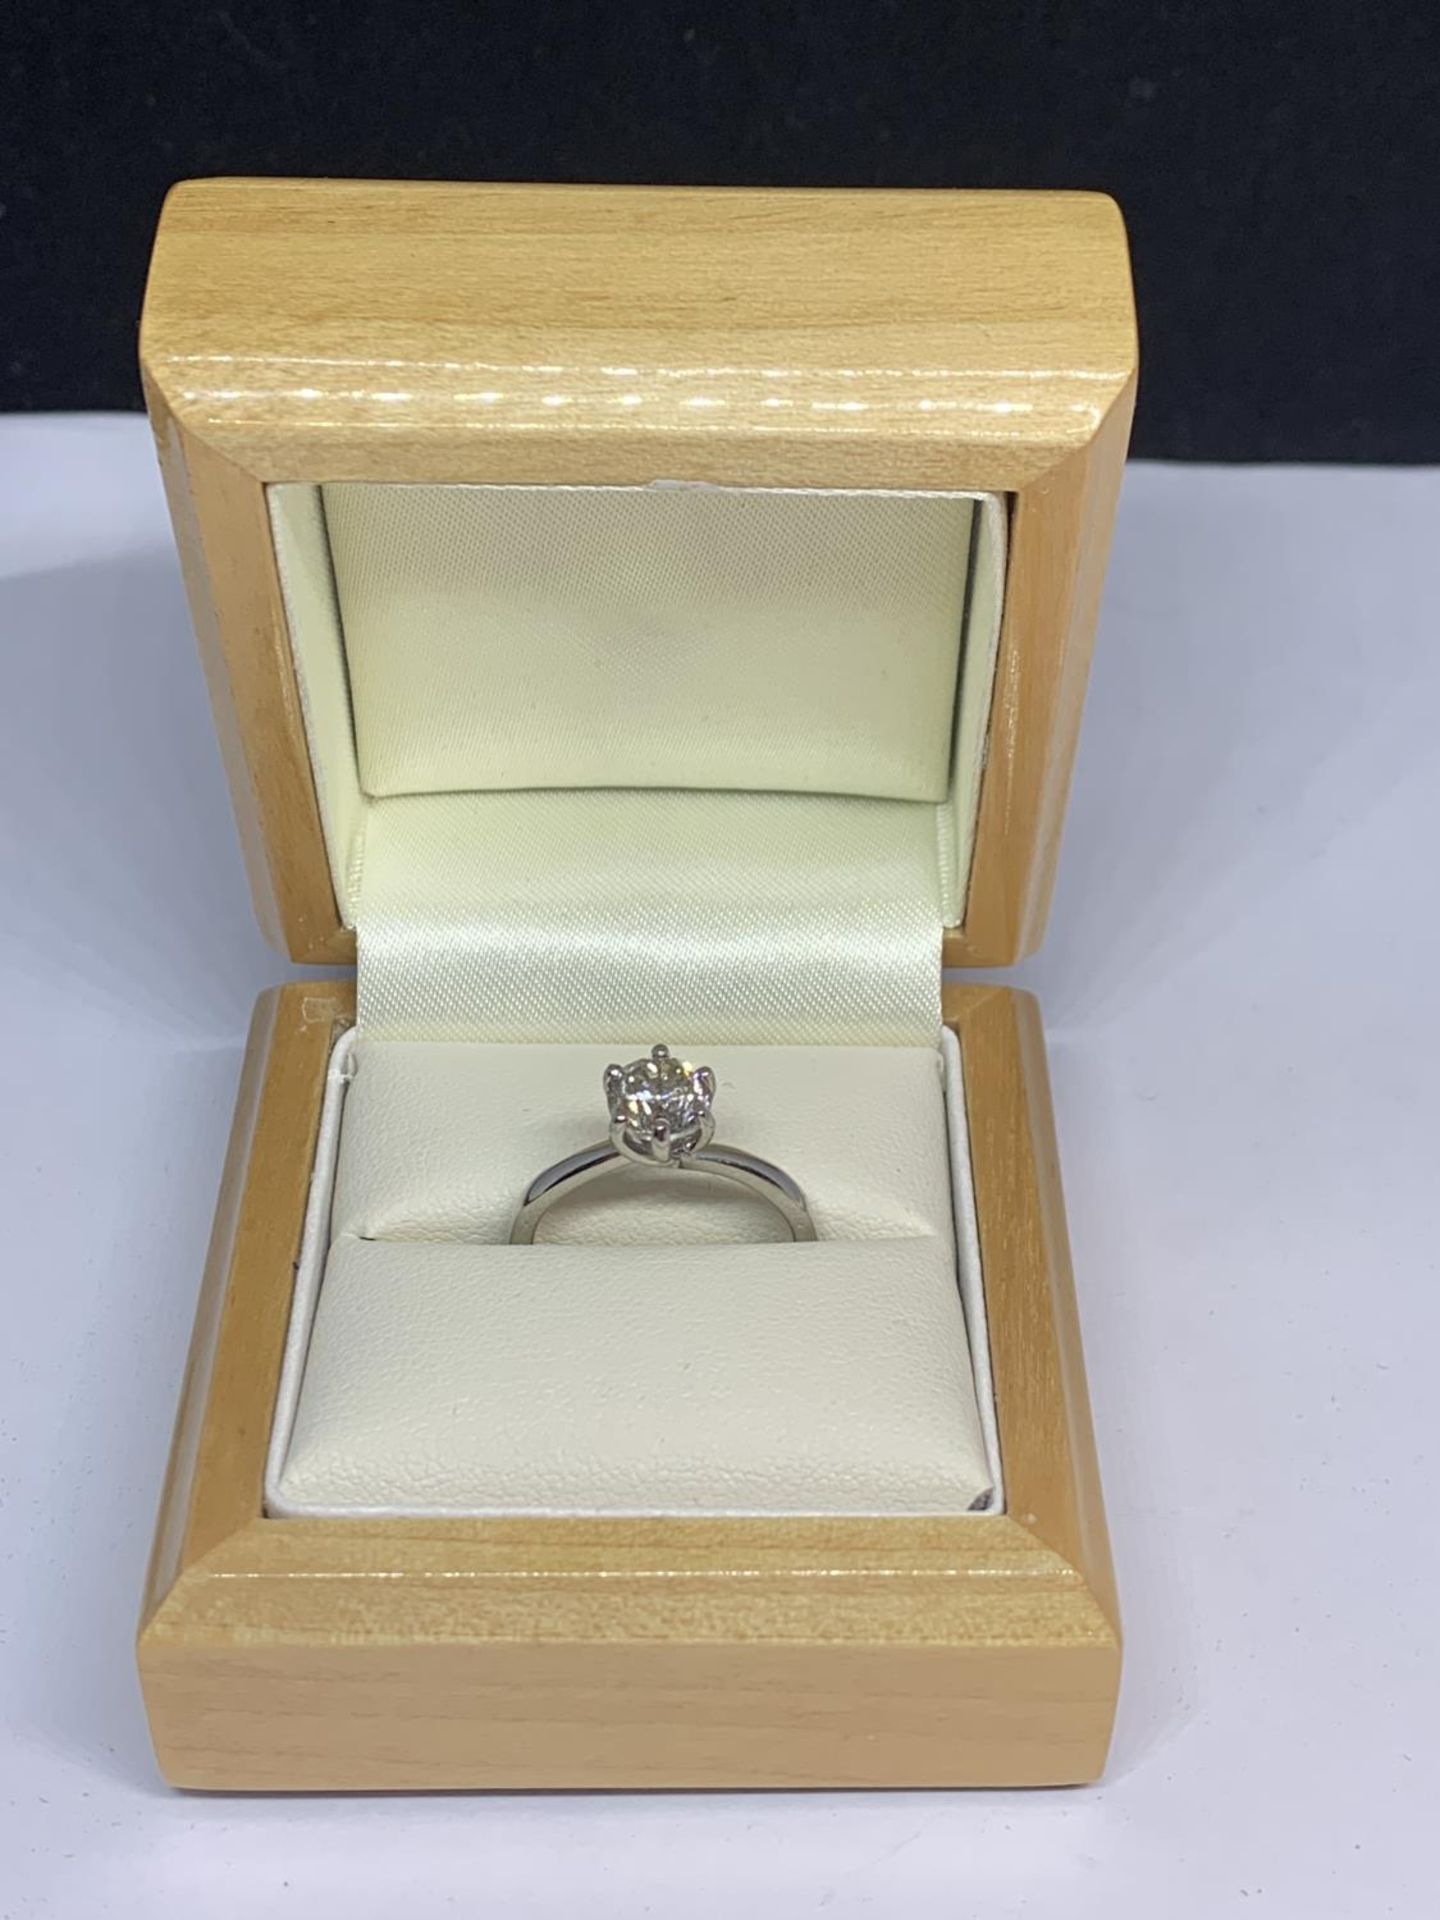 A PLATINIUM RING WITH A 1.37 CARAT SOLITAIRE DIAMOND SIZE M WITH A PRESENTATION BOX - Image 5 of 5